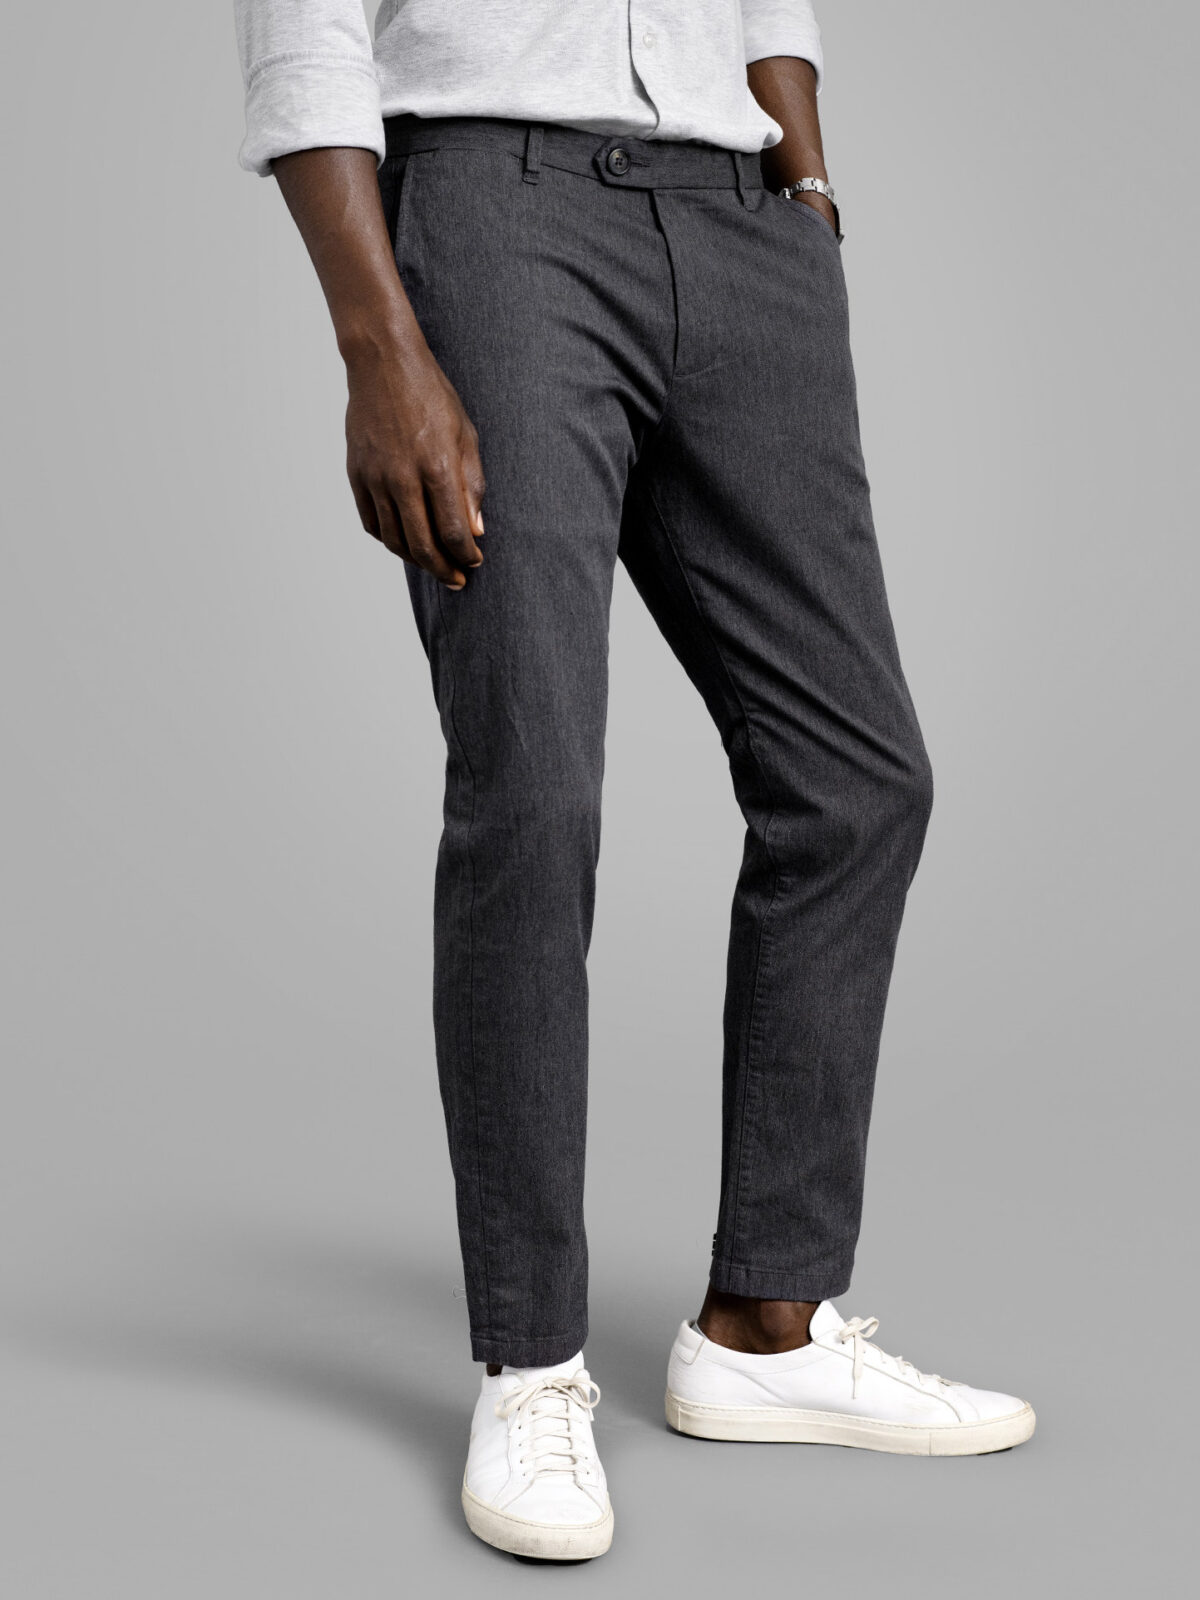 Aggregate 202+ best sneakers for chinos super hot